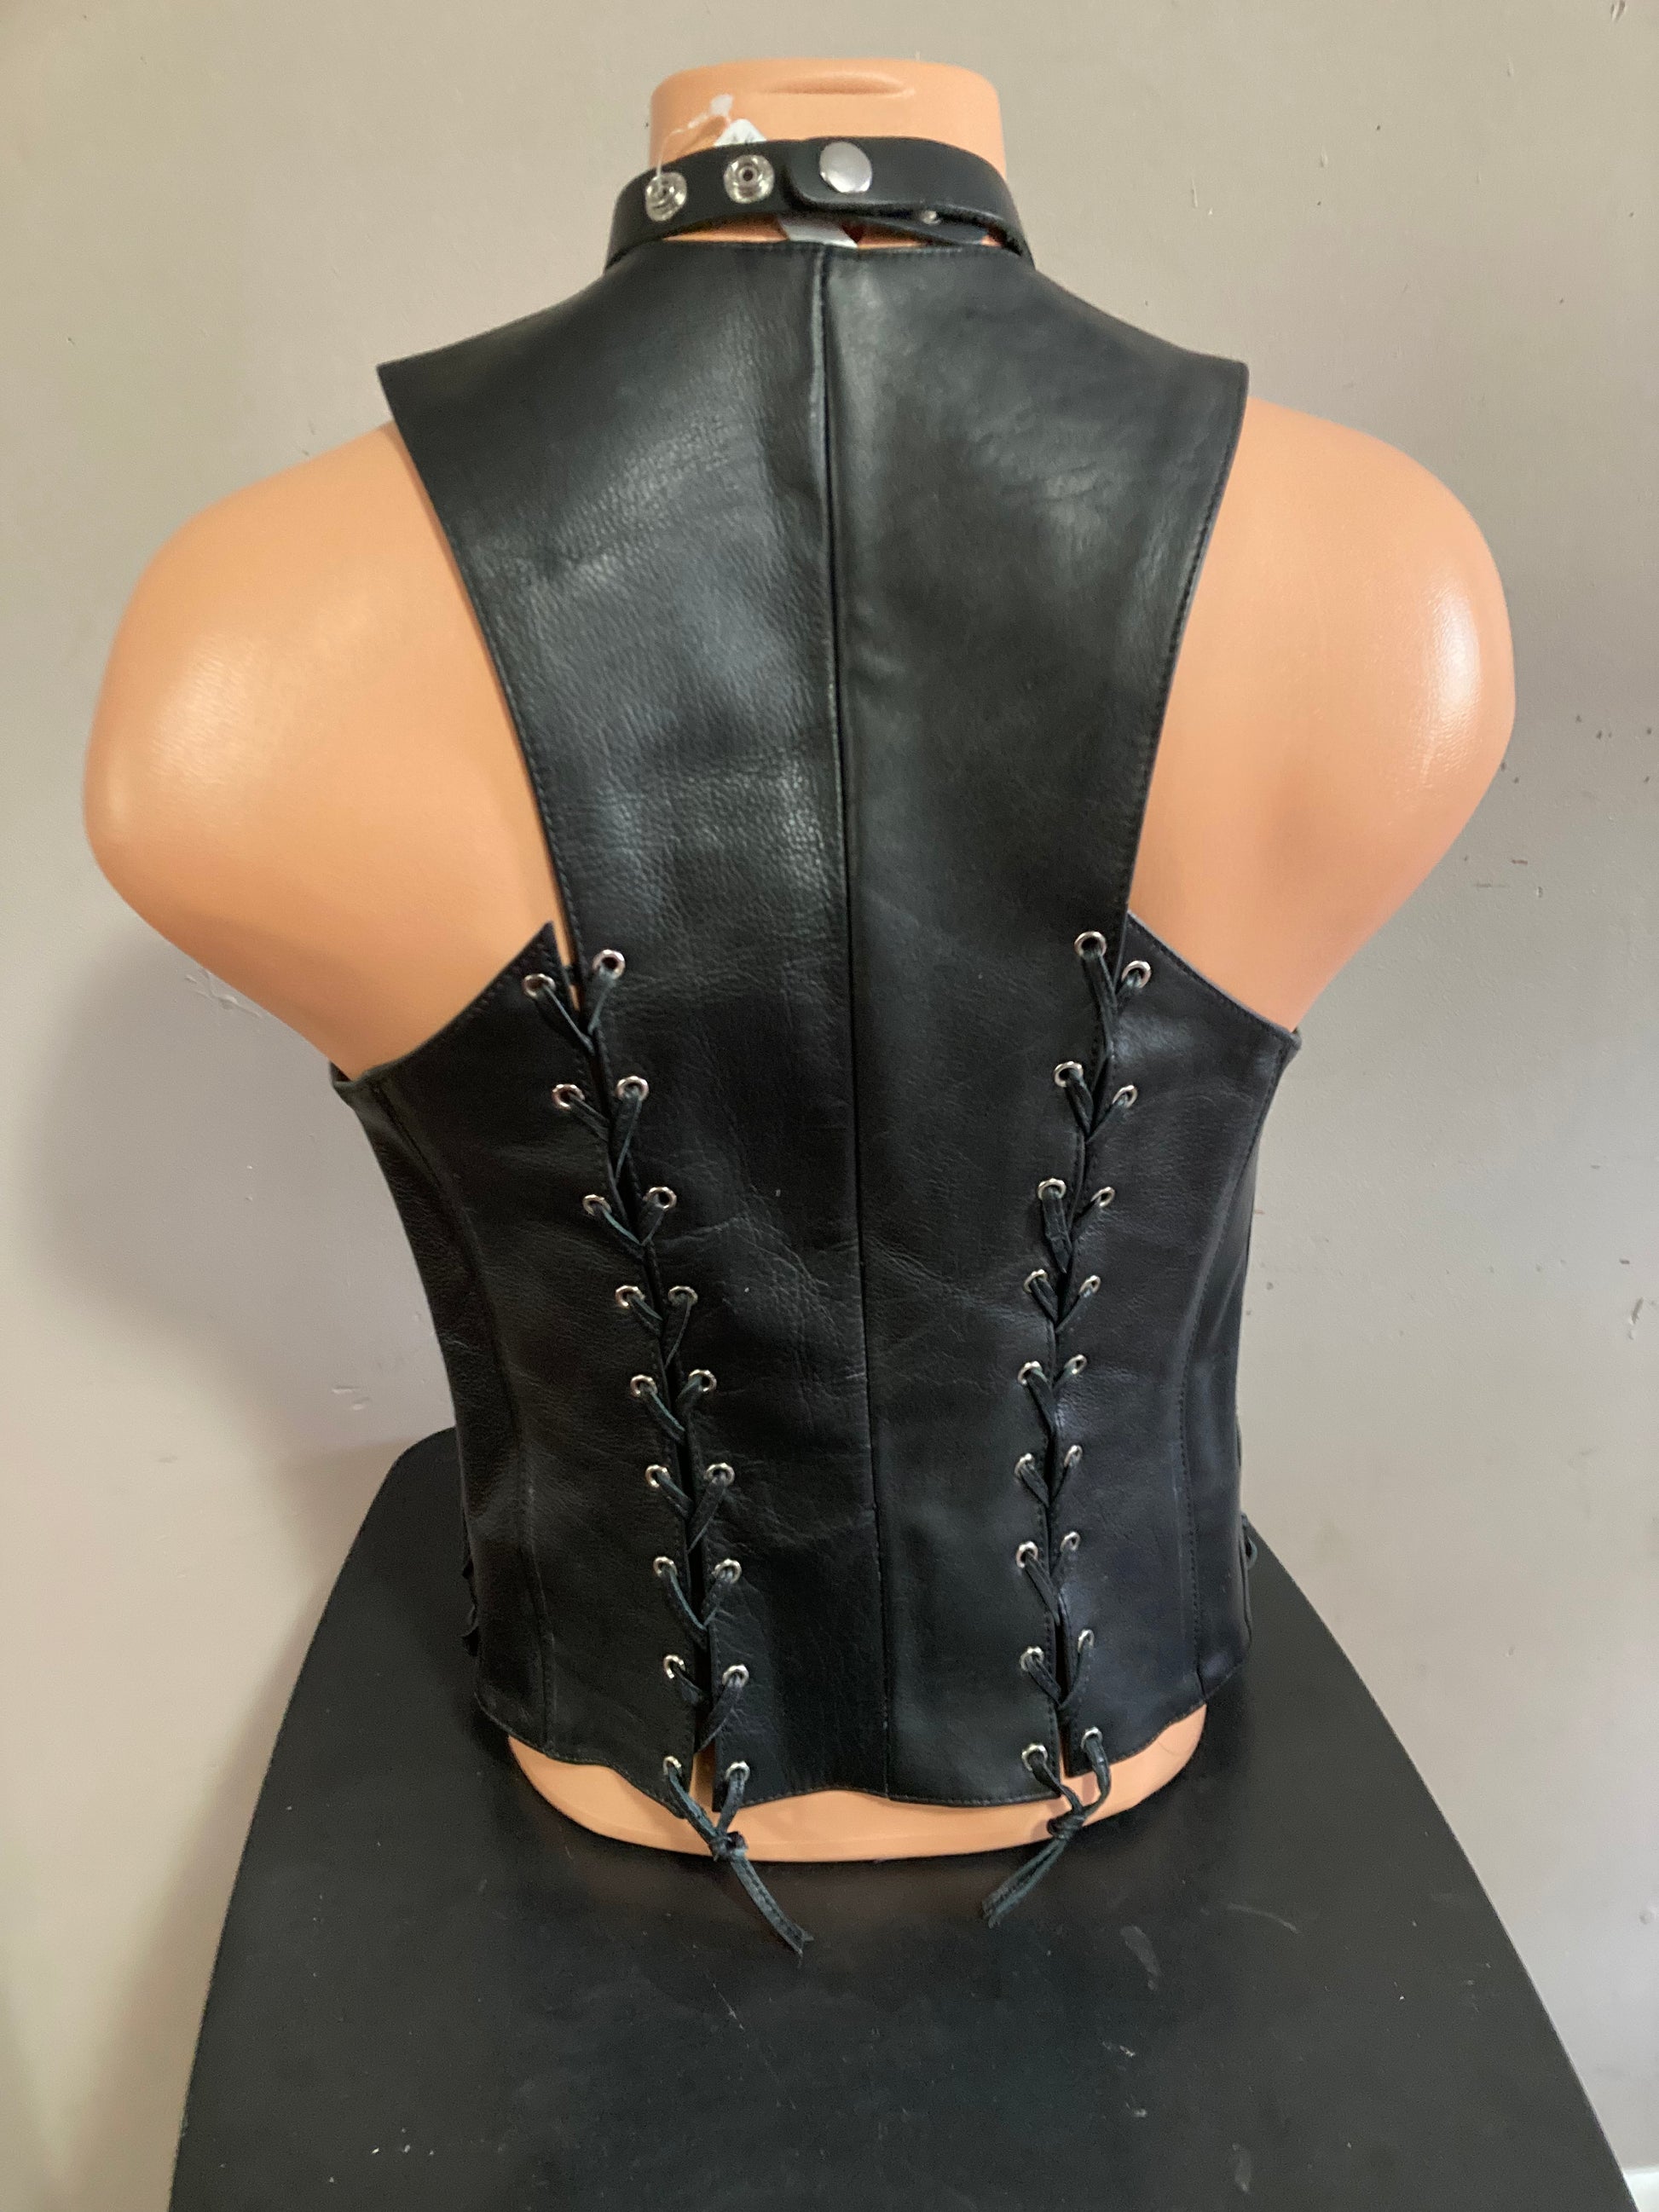 A mannequin showing the back of the vest with 2 back  laces.